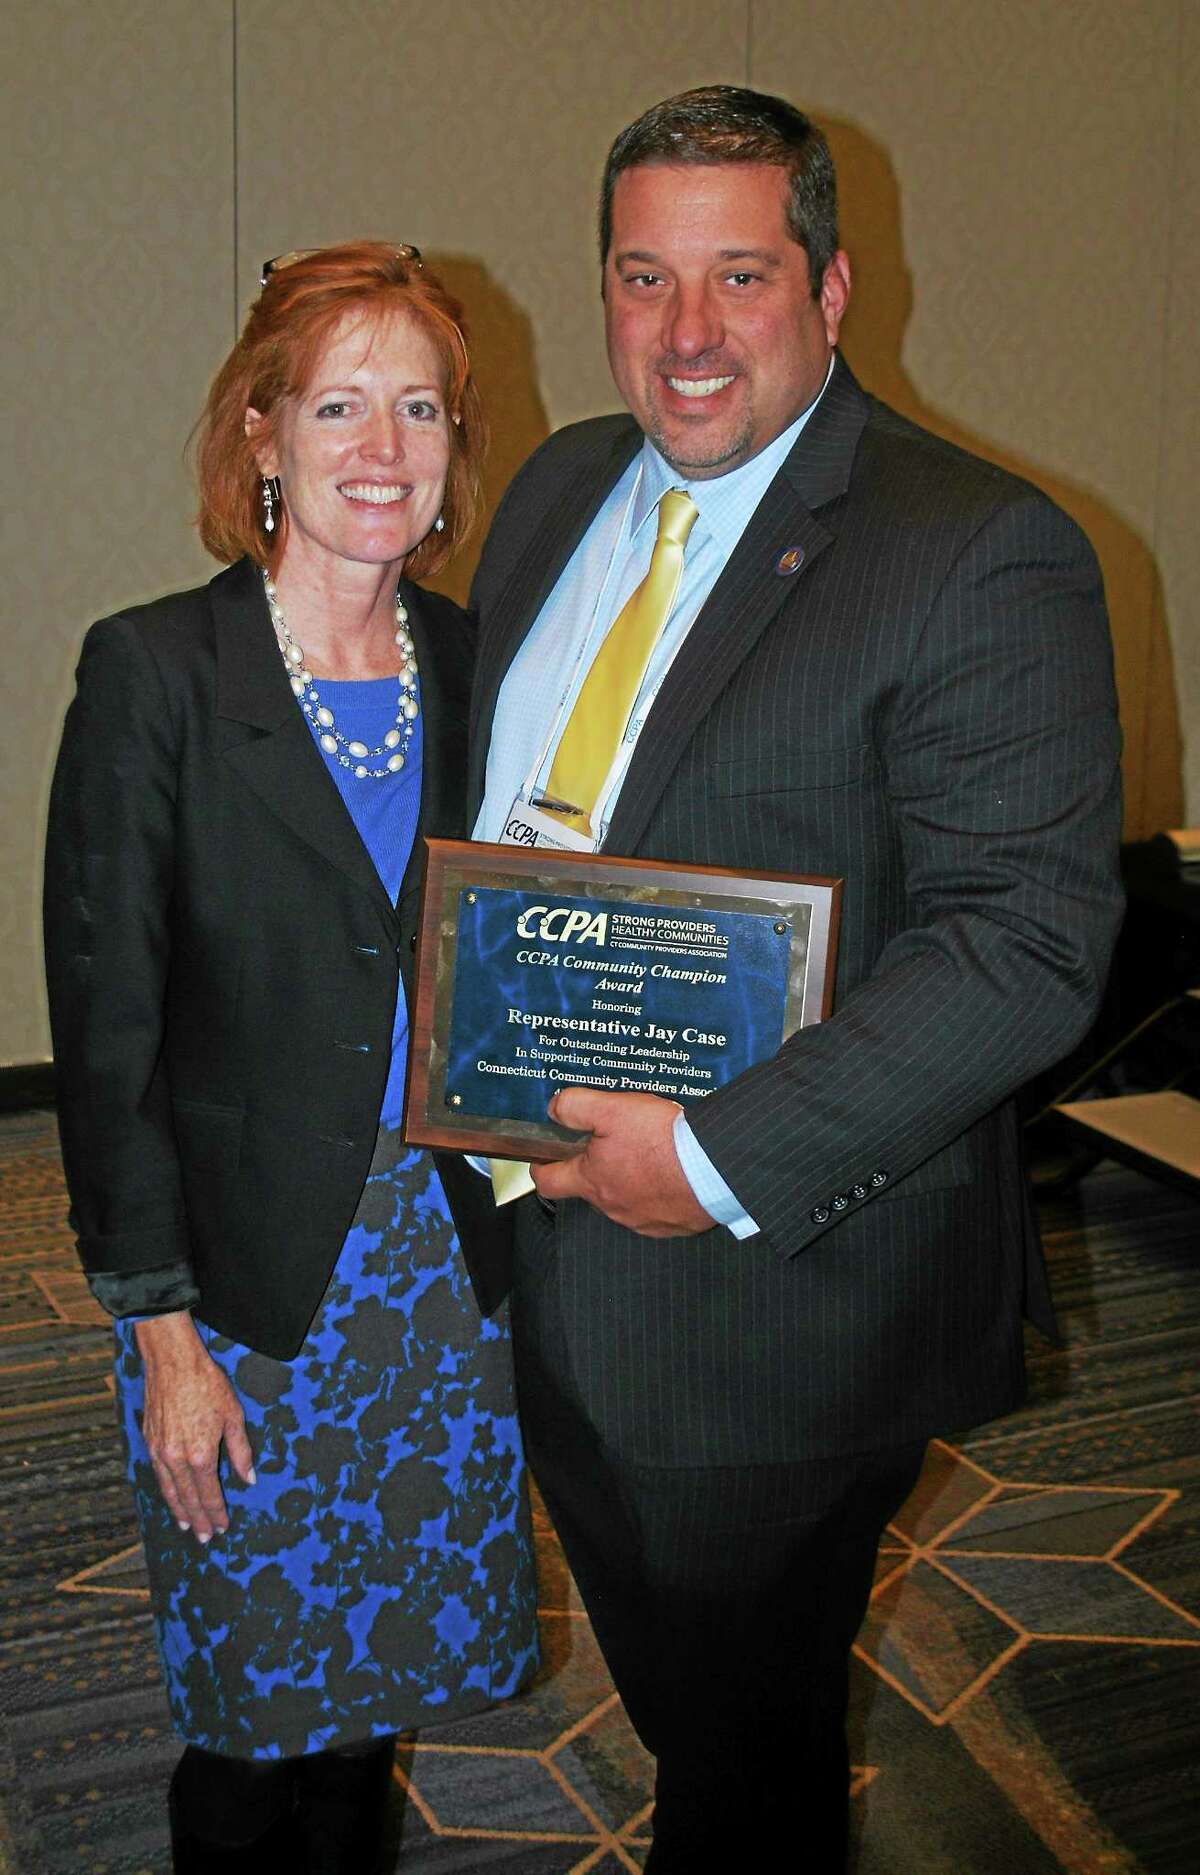 Morna Murray, president and CEO of CCPA, with state Rep. Jay Case.